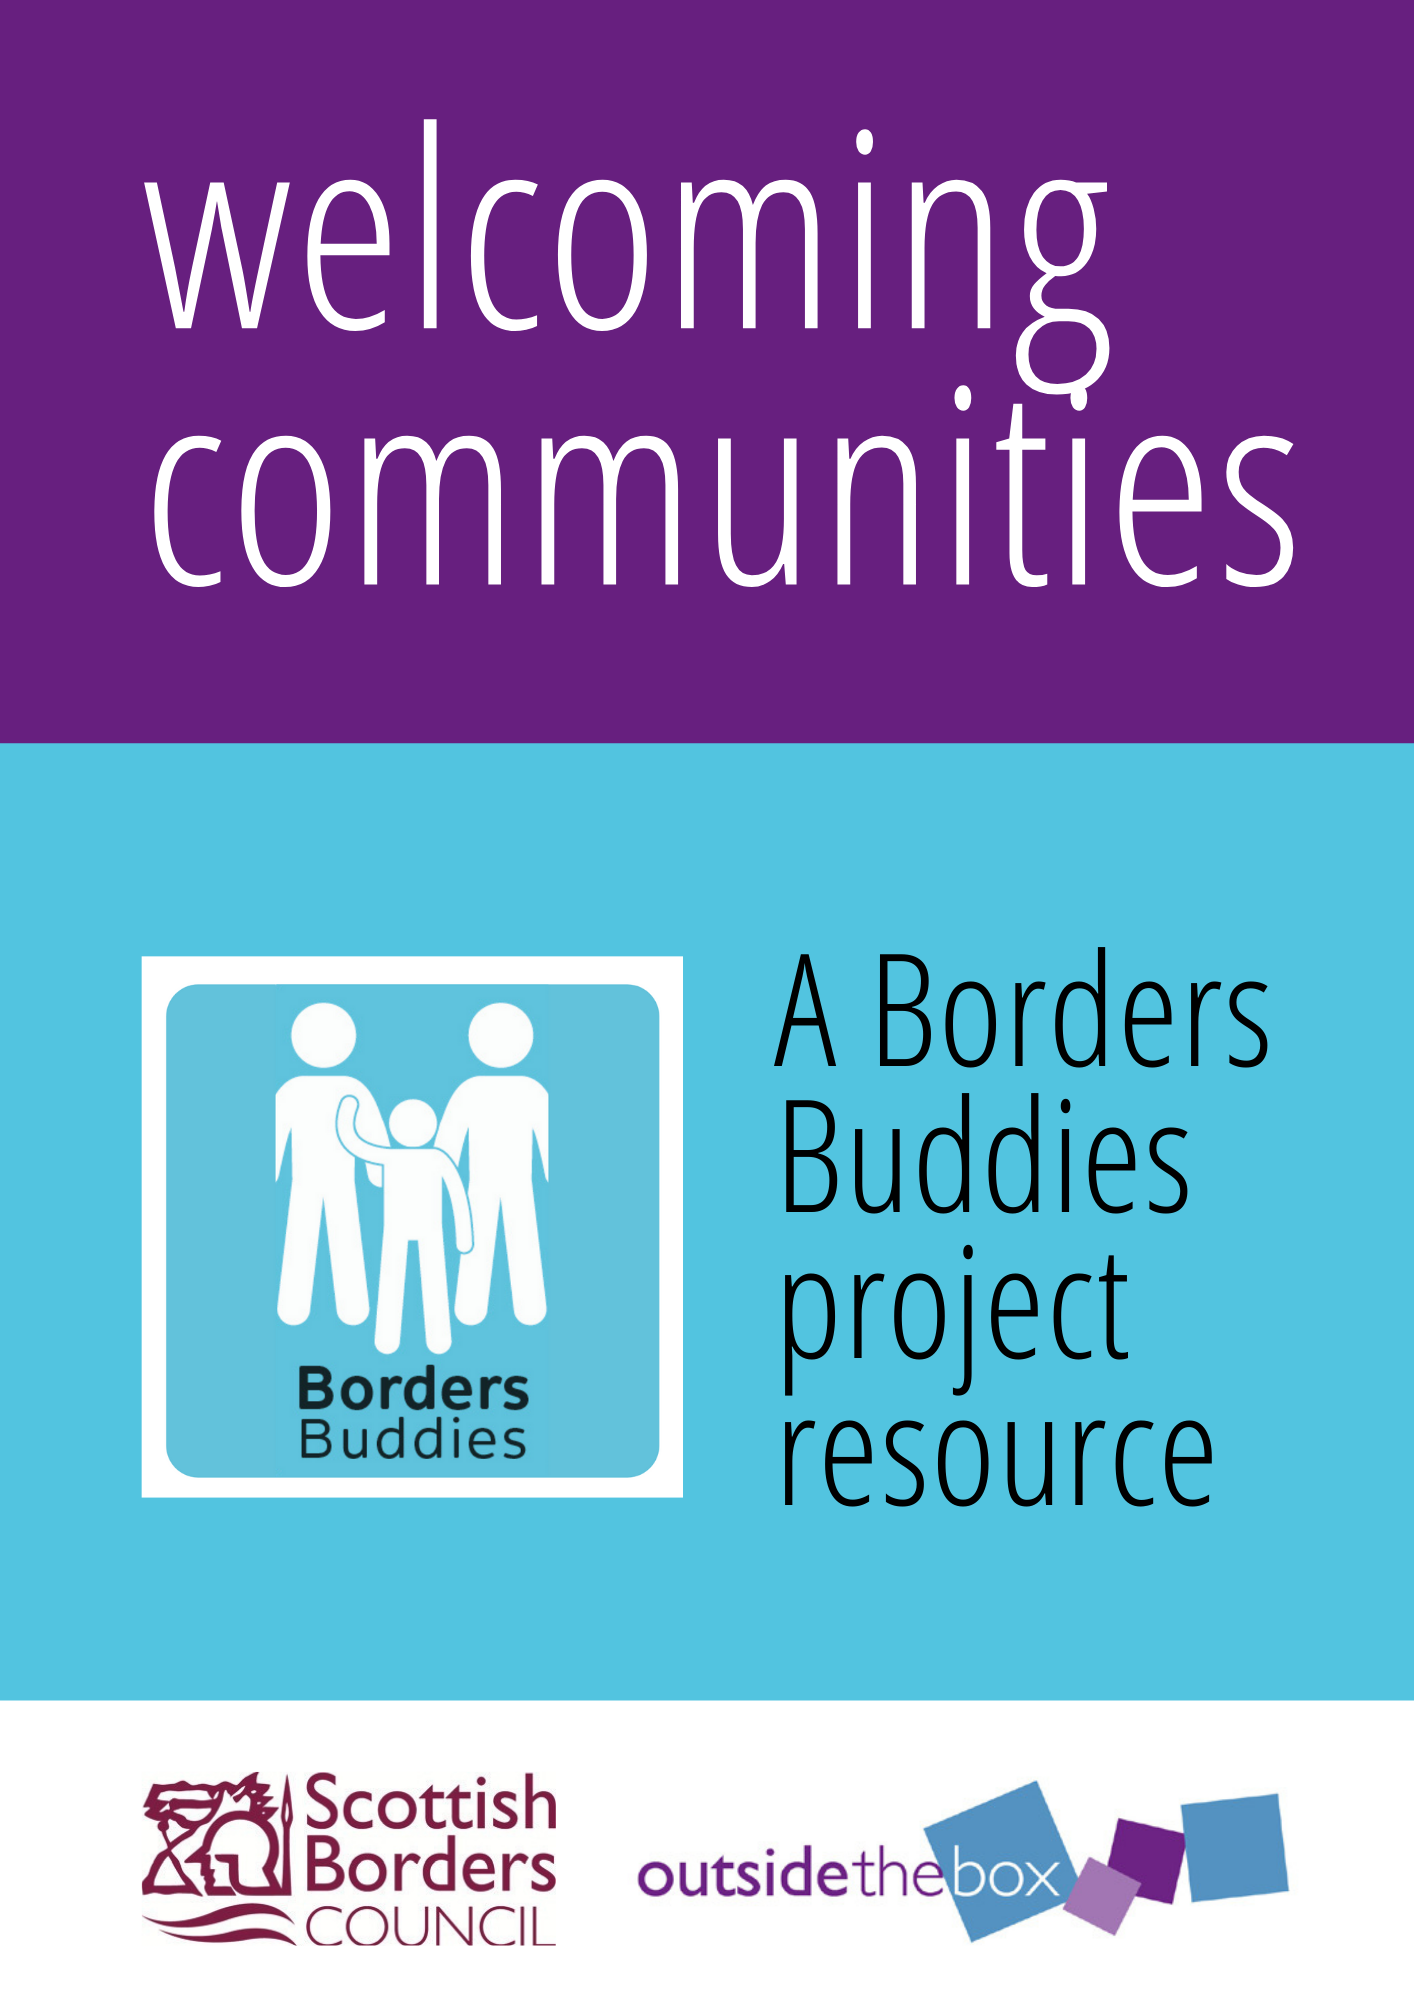 Welcoming communities. A Borders Buddies project